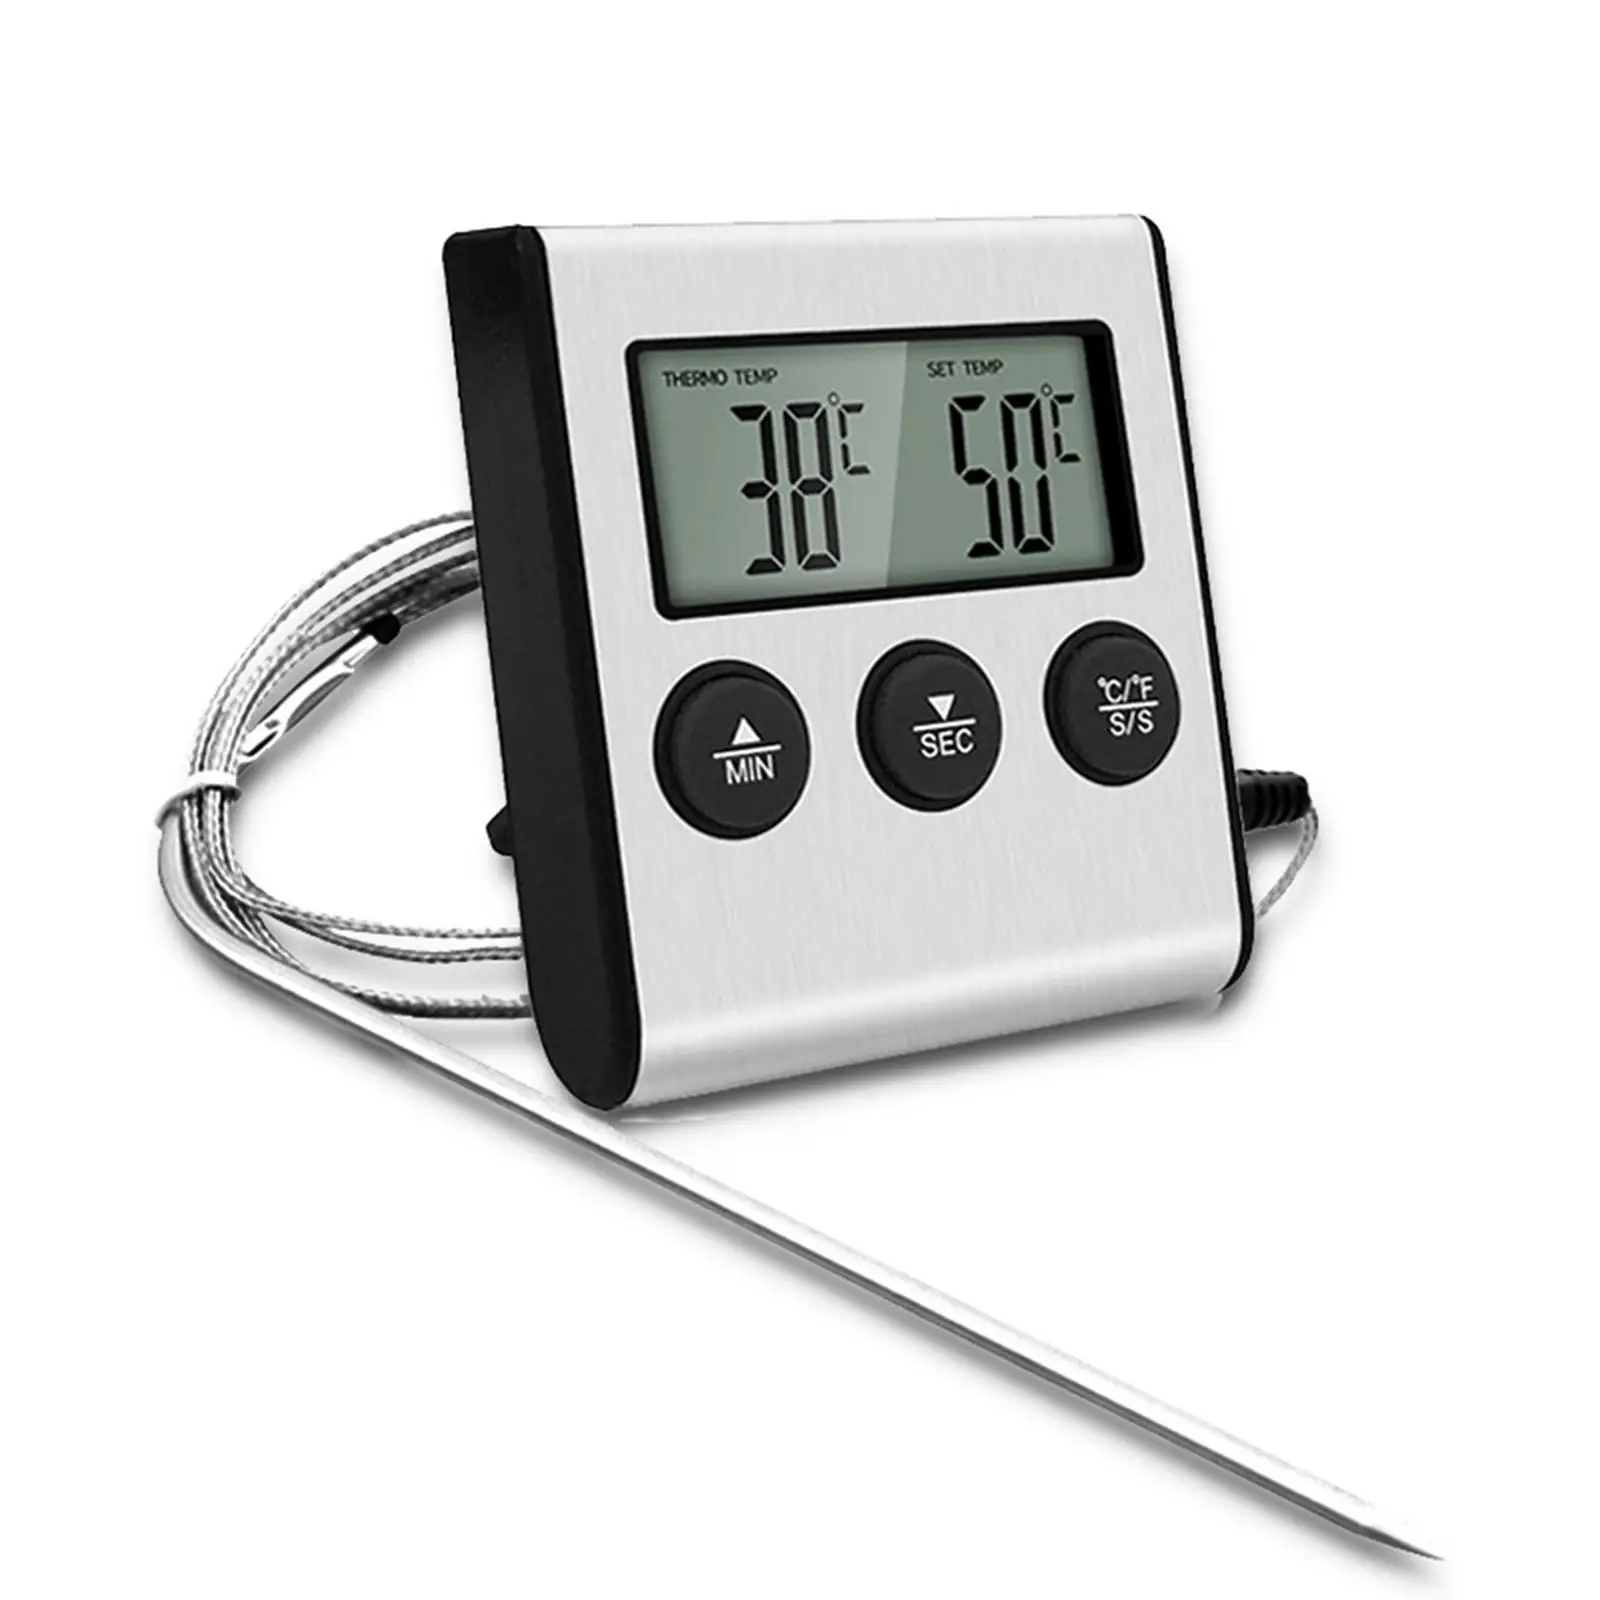 Protable Digital Cooking Food Meat Smoker Oven Kitchen BBQ Grill Thermometer